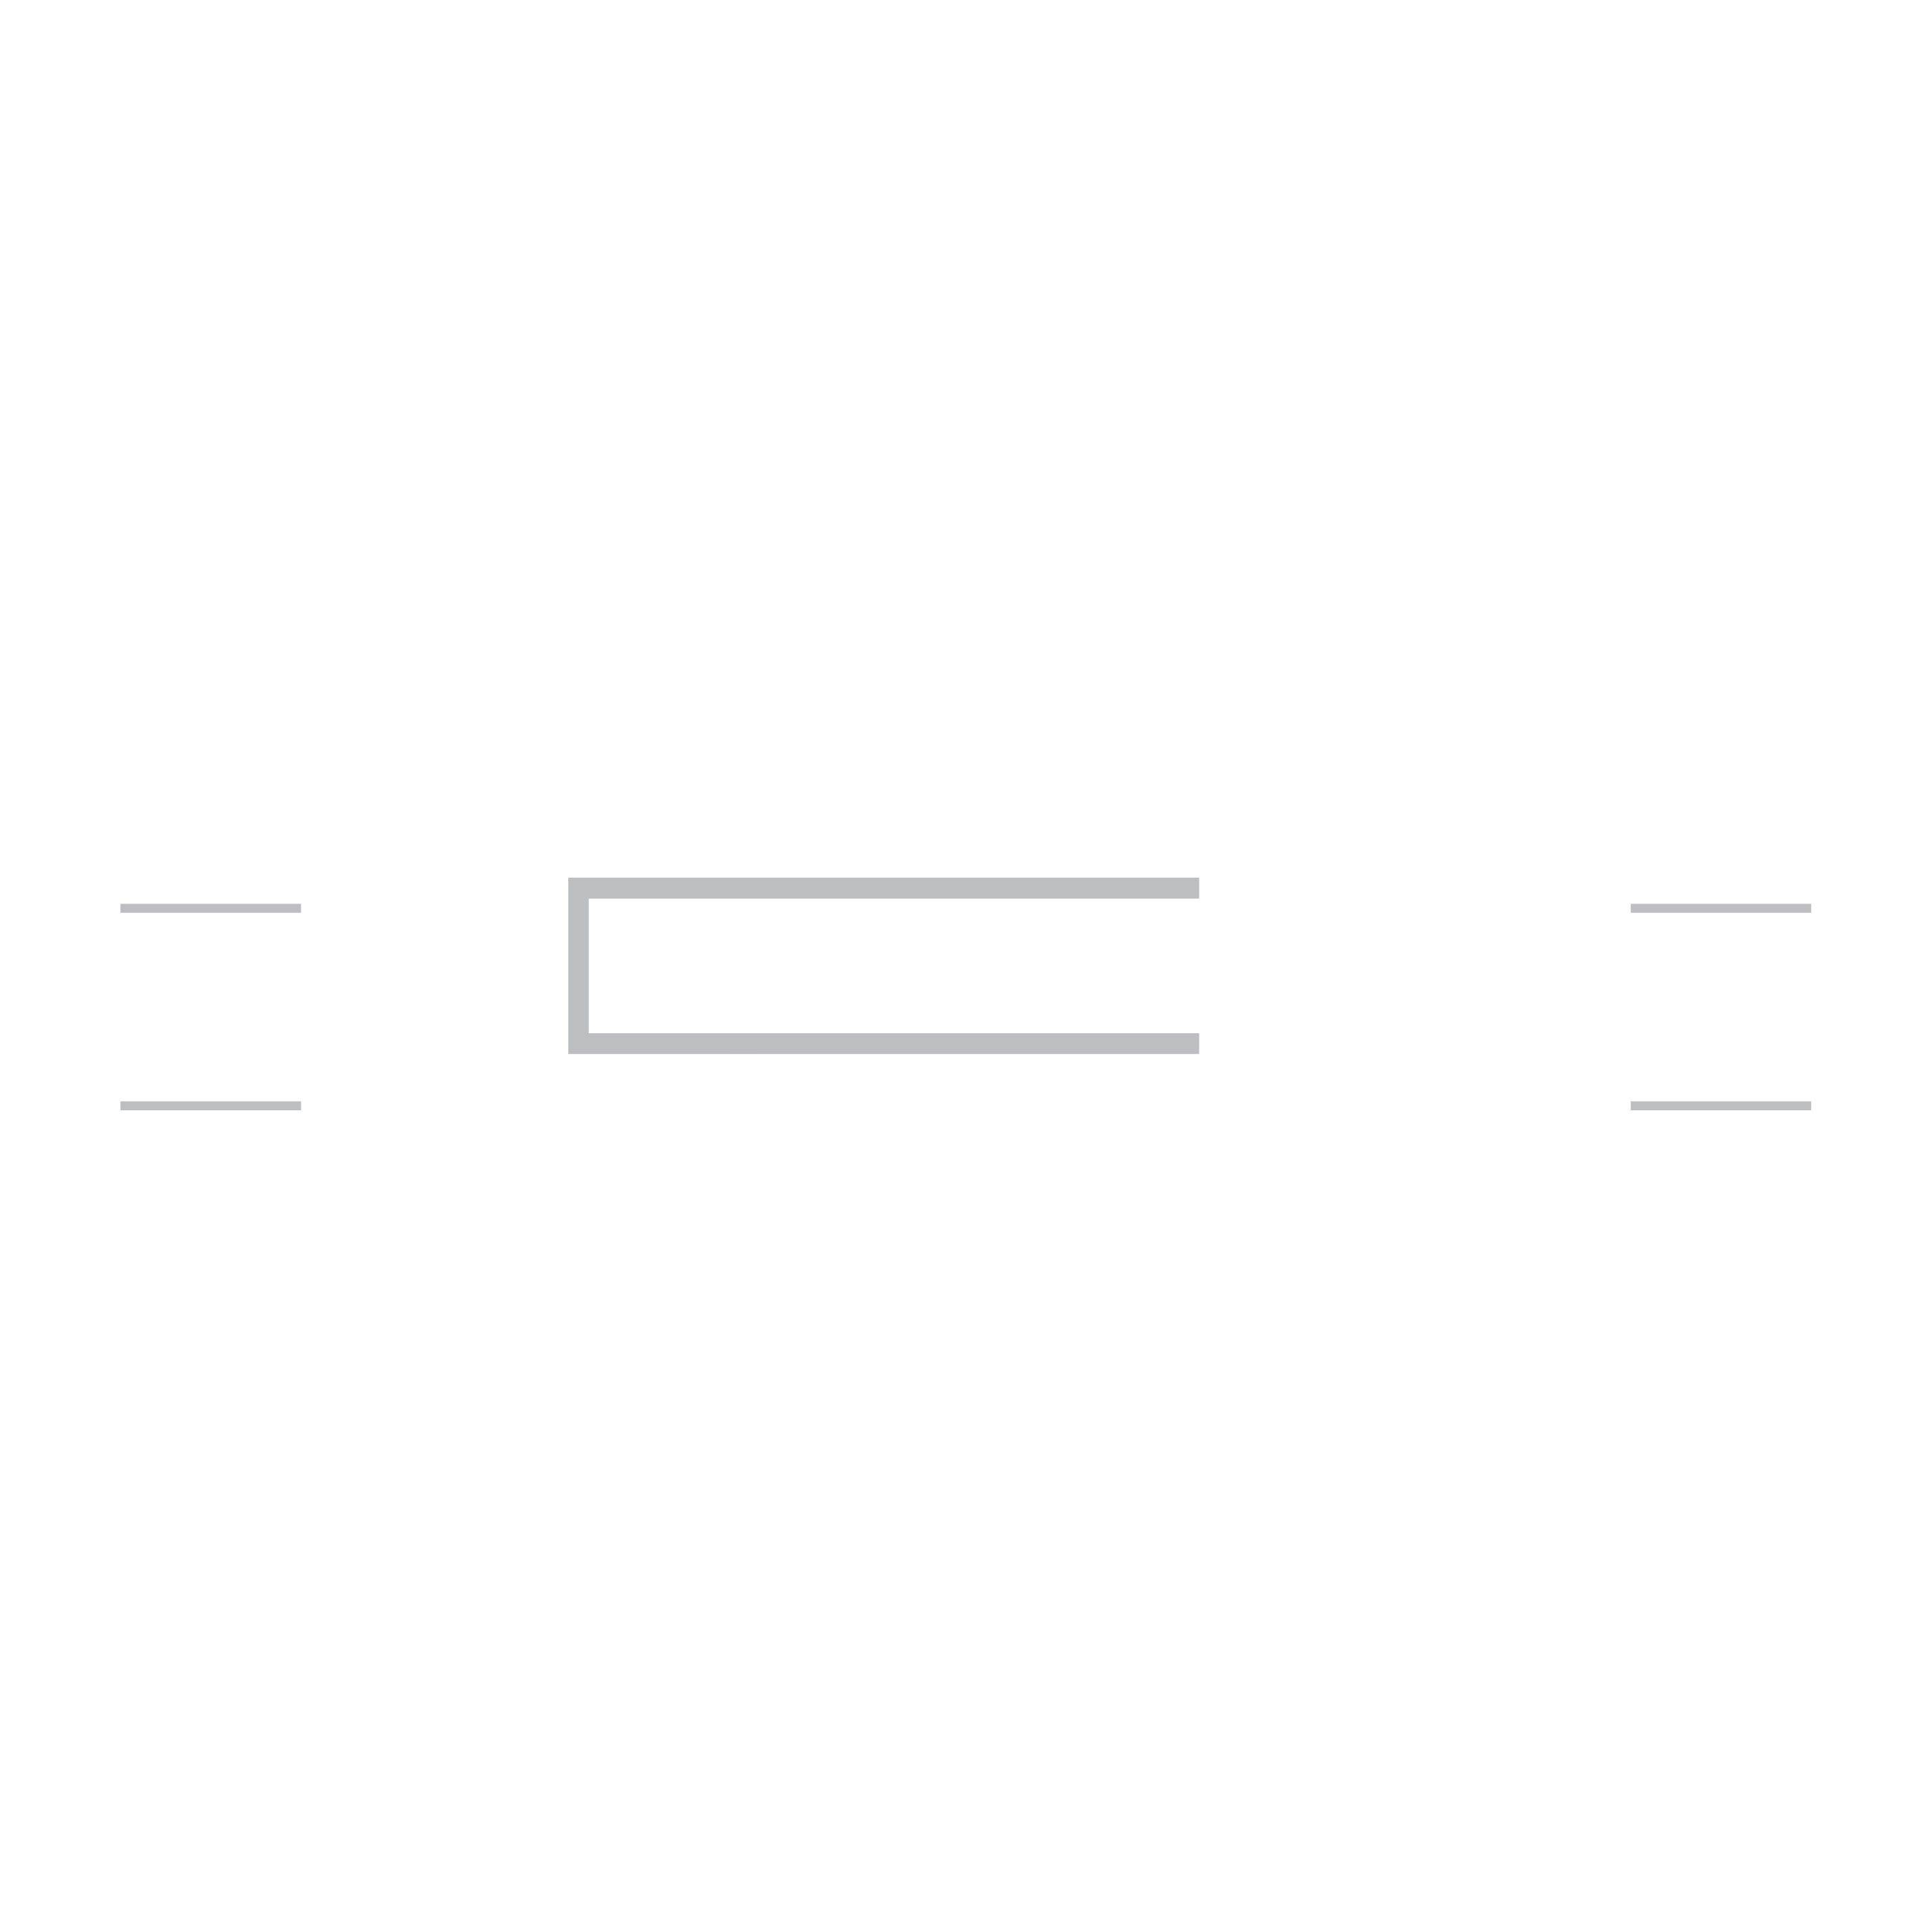 City & Country Contracting's new logo with a circle around it.